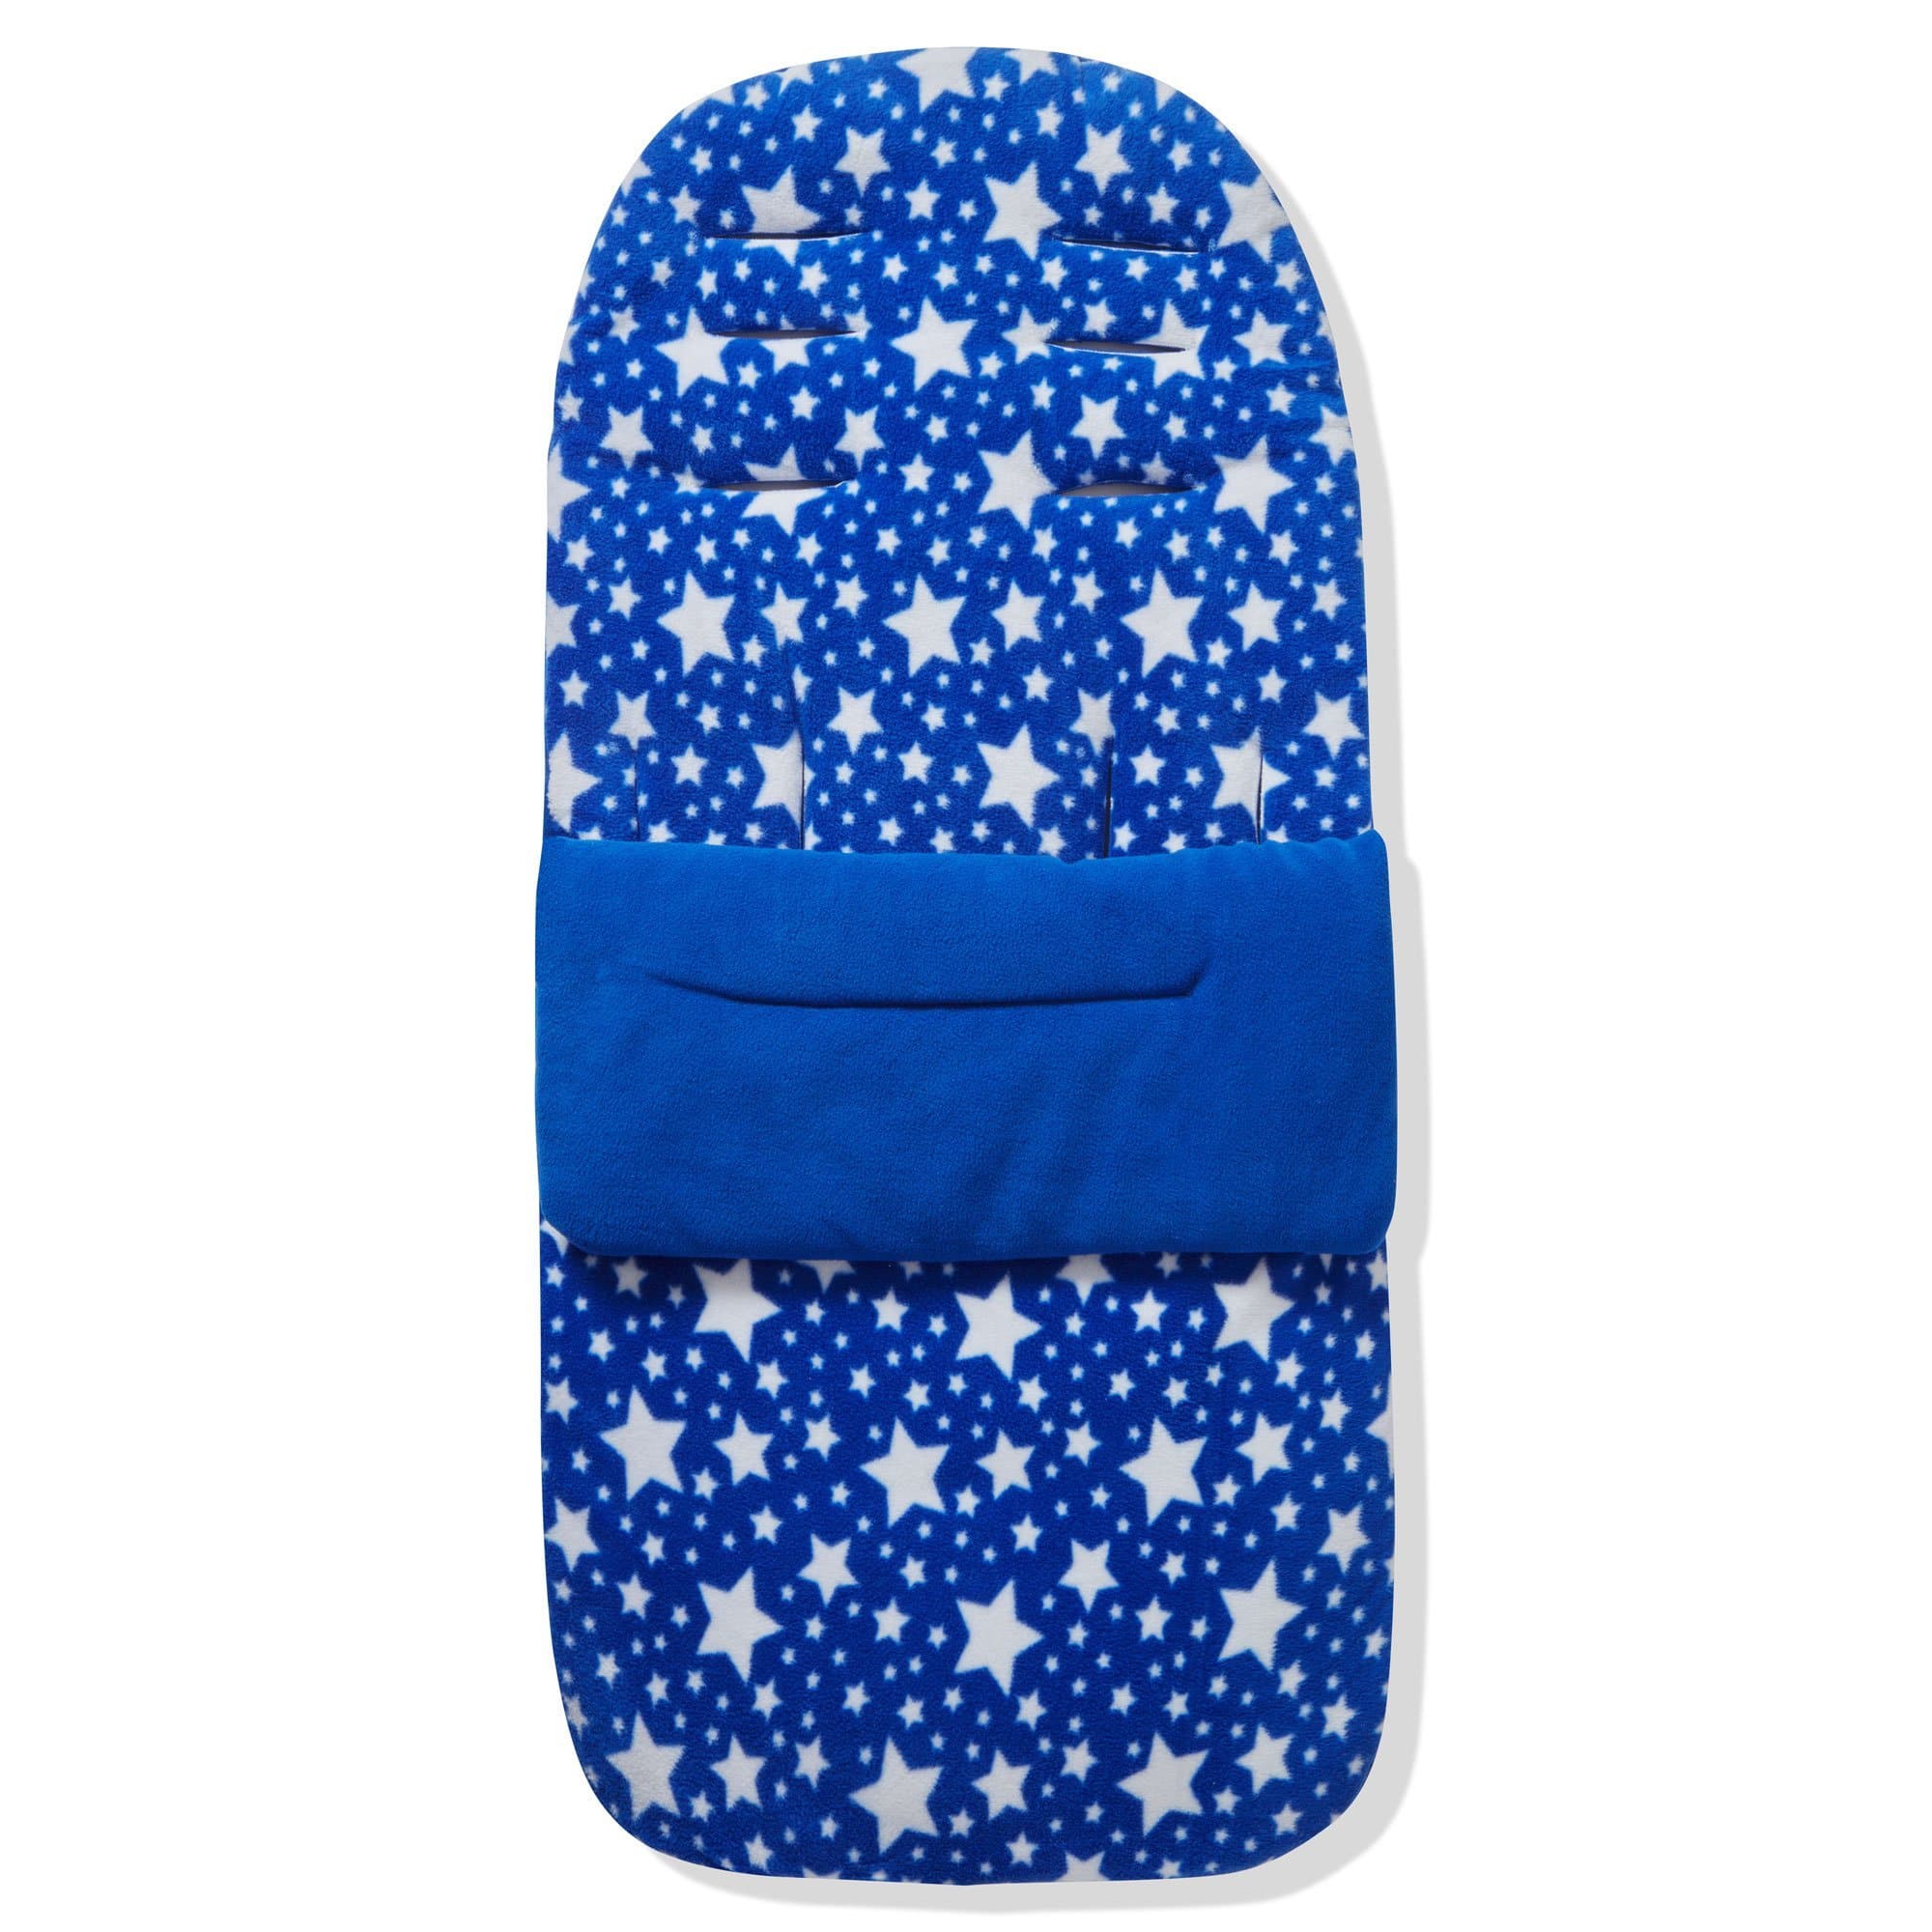 Fleece Footmuff / Cosy Toes Compatible with Hybrid - For Your Little One